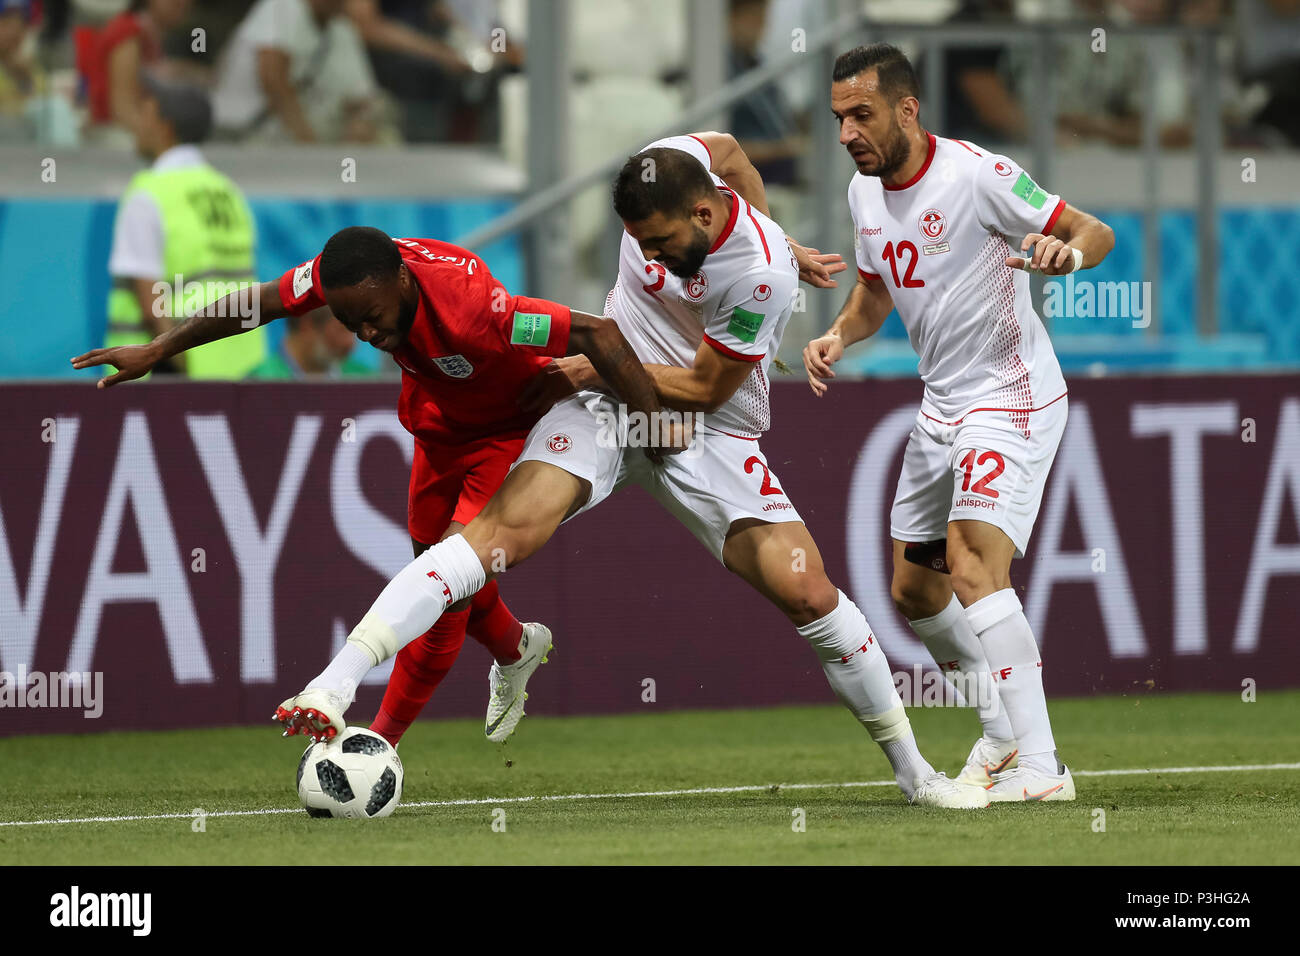 Volgograd, Russia. 18th June, 2018. Raheem Sterling of England, Syam Ben Youssef of Tunisia and Ali Maaloul of Tunisia during the 2018 FIFA World Cup Group G match between Tunisia and England at Volgograd Arena on June 18th 2018 in Volgograd, Russia.  Credit: PHC Images/Alamy Live News Stock Photo